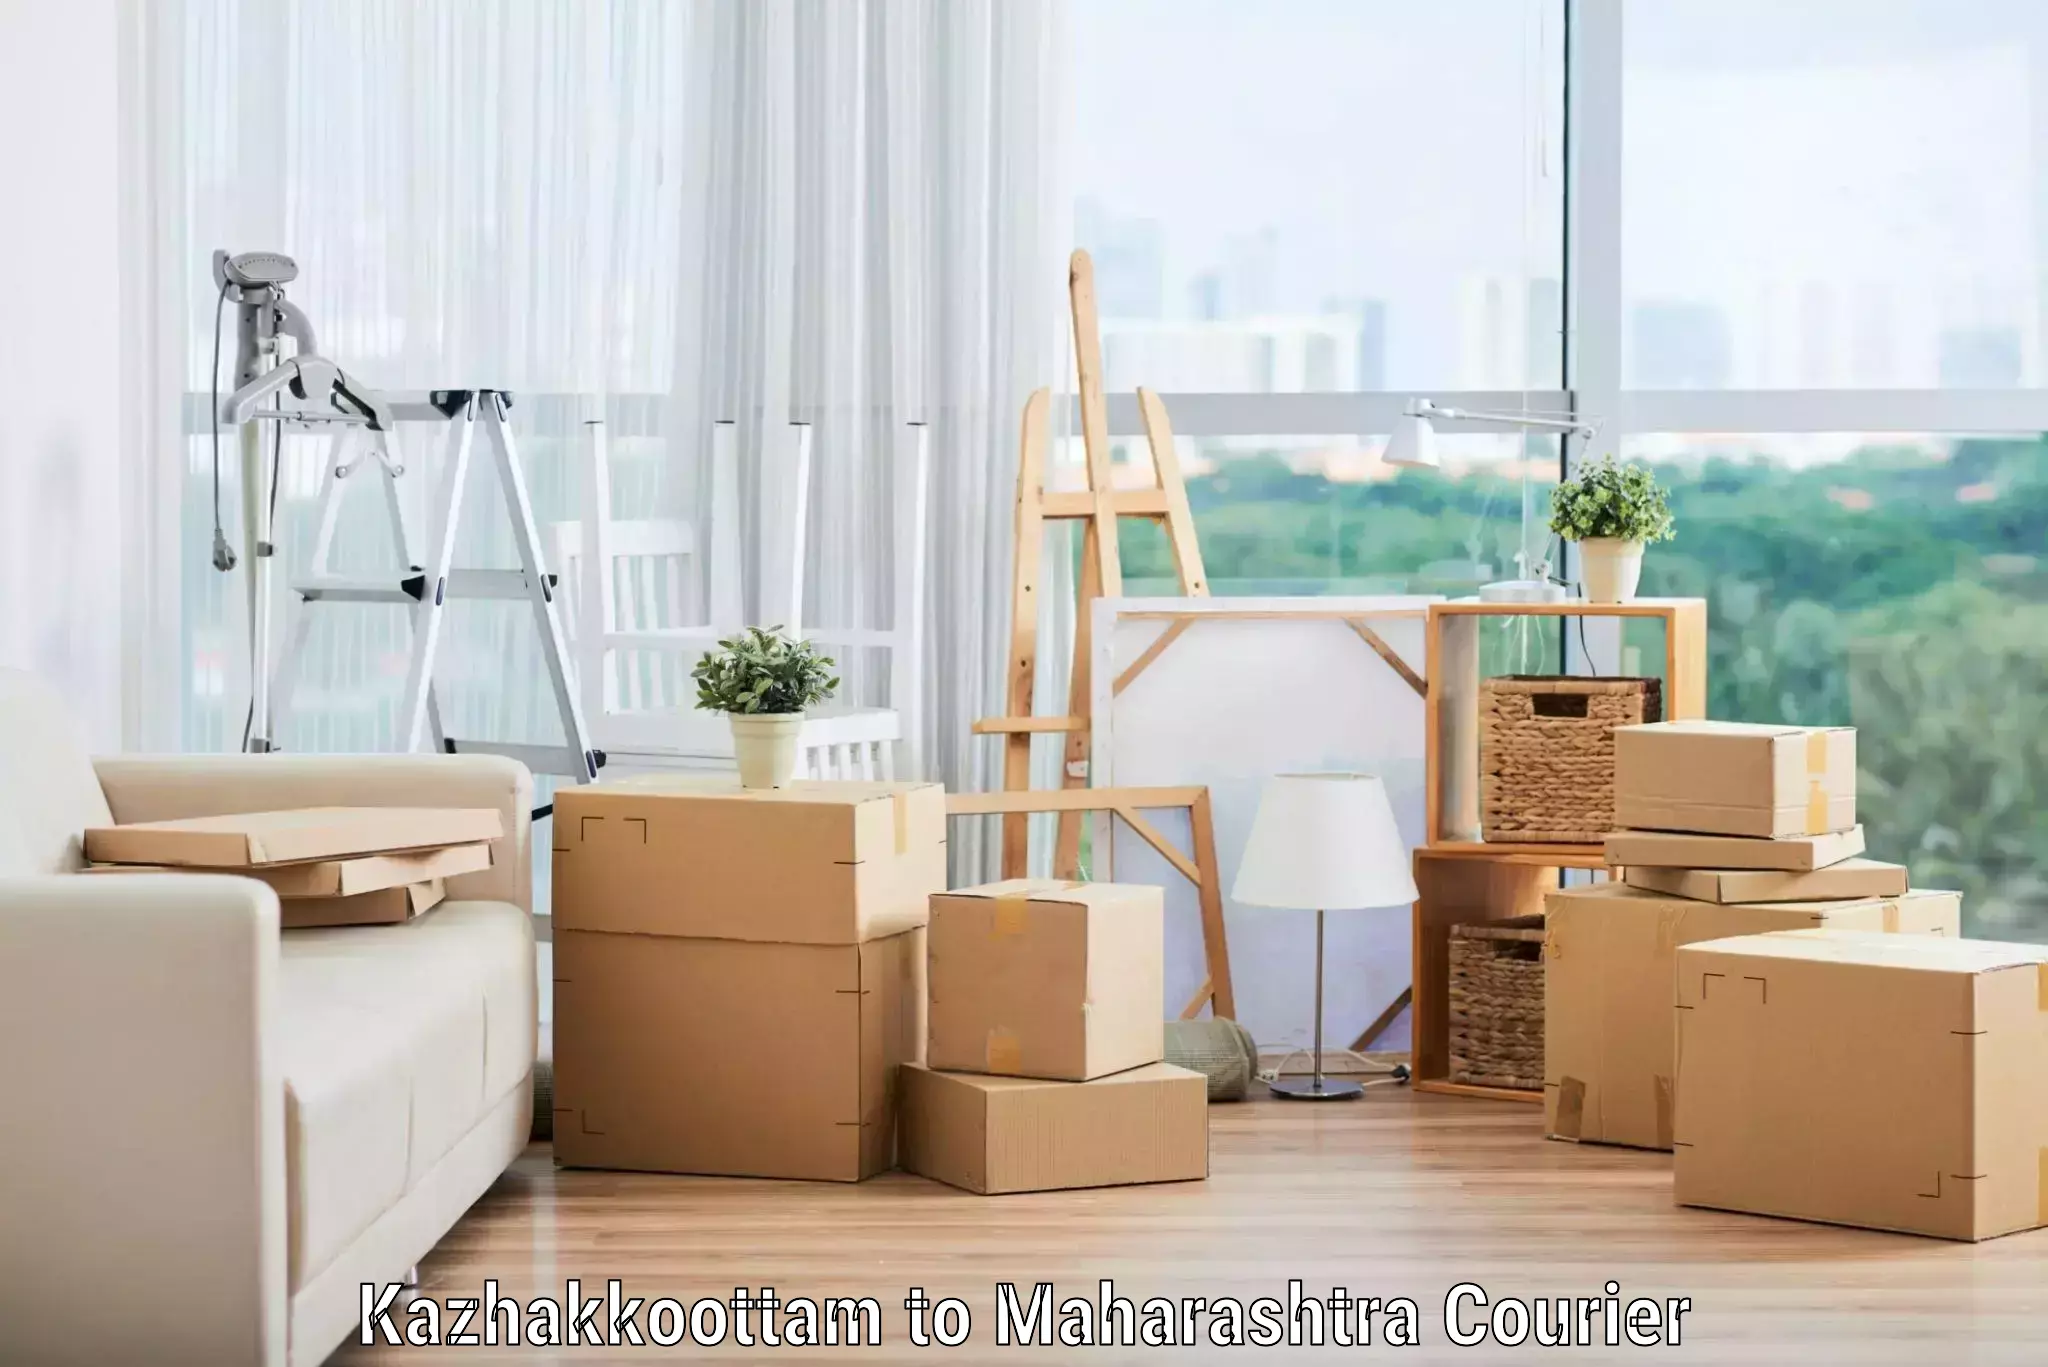 Affordable moving services in Kazhakkoottam to Rashiwade